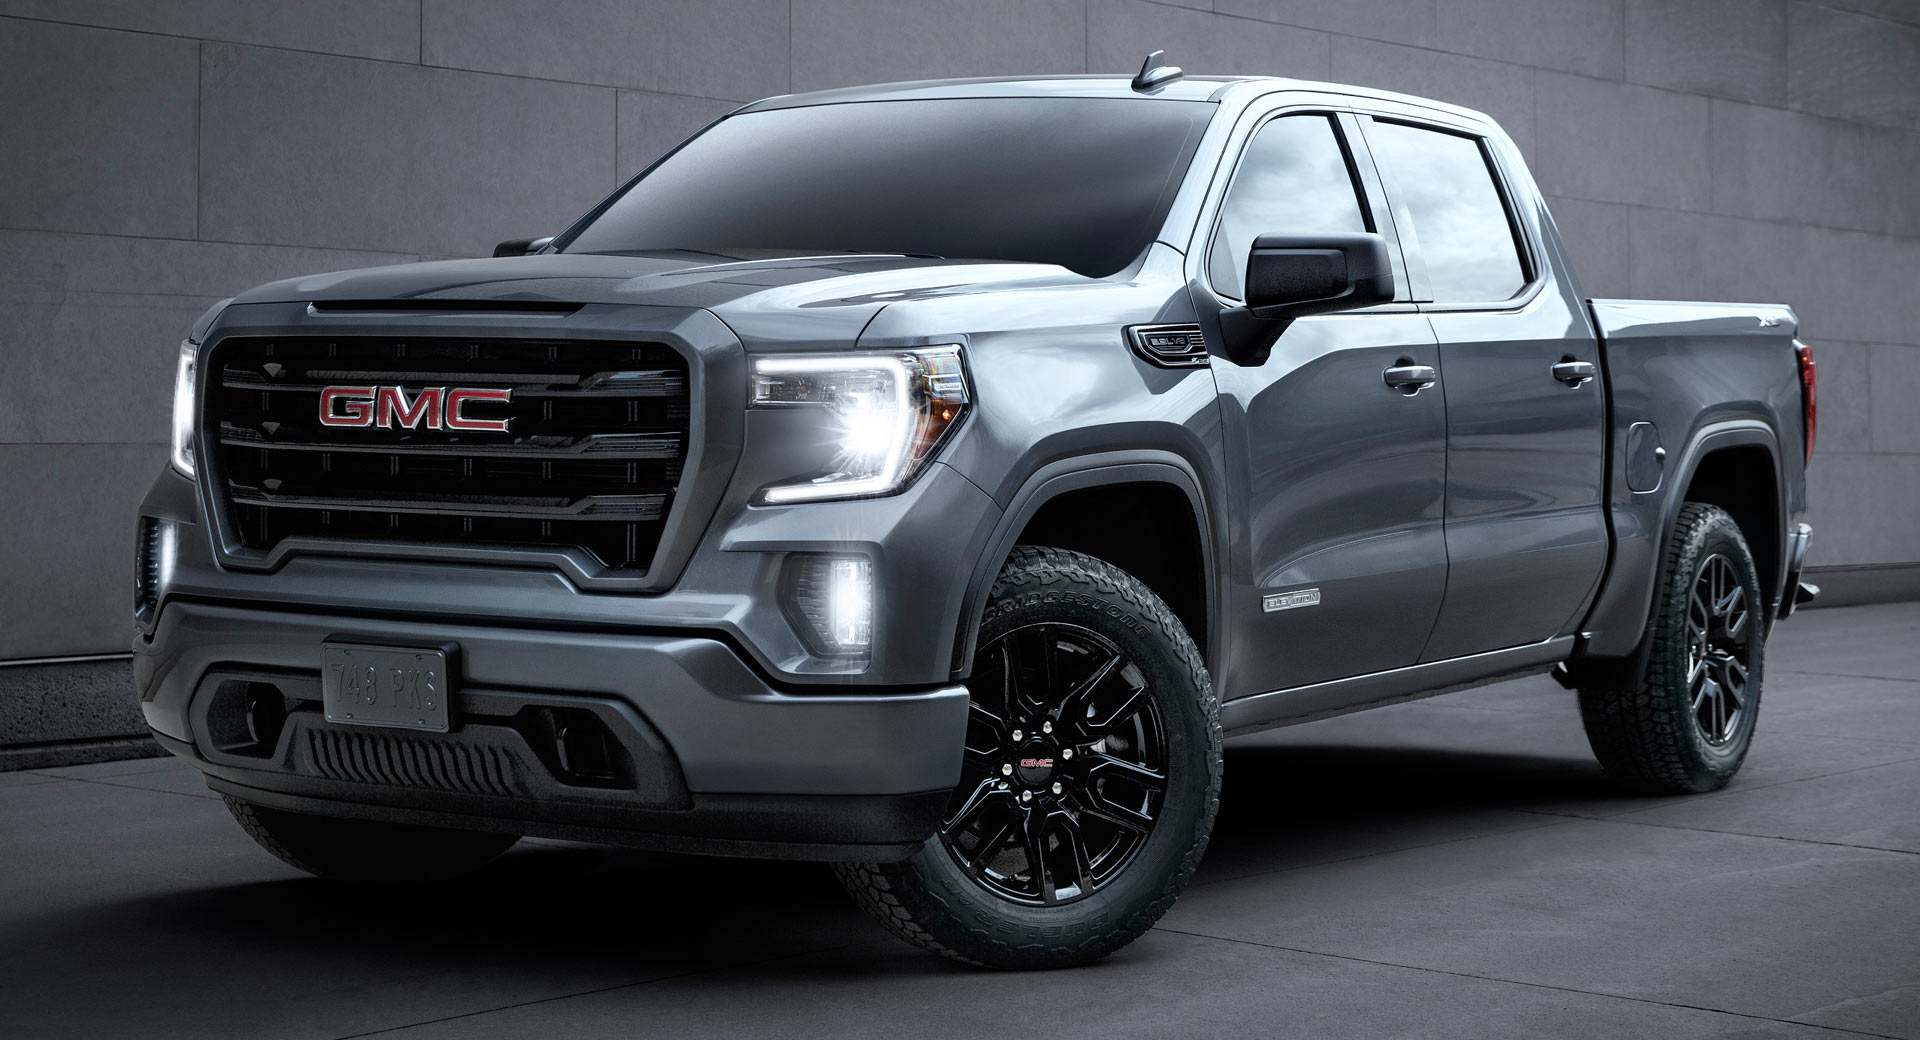 2020-gmc-sierra-1500-arrives-with-new-tech-updated-at4-carbonpro